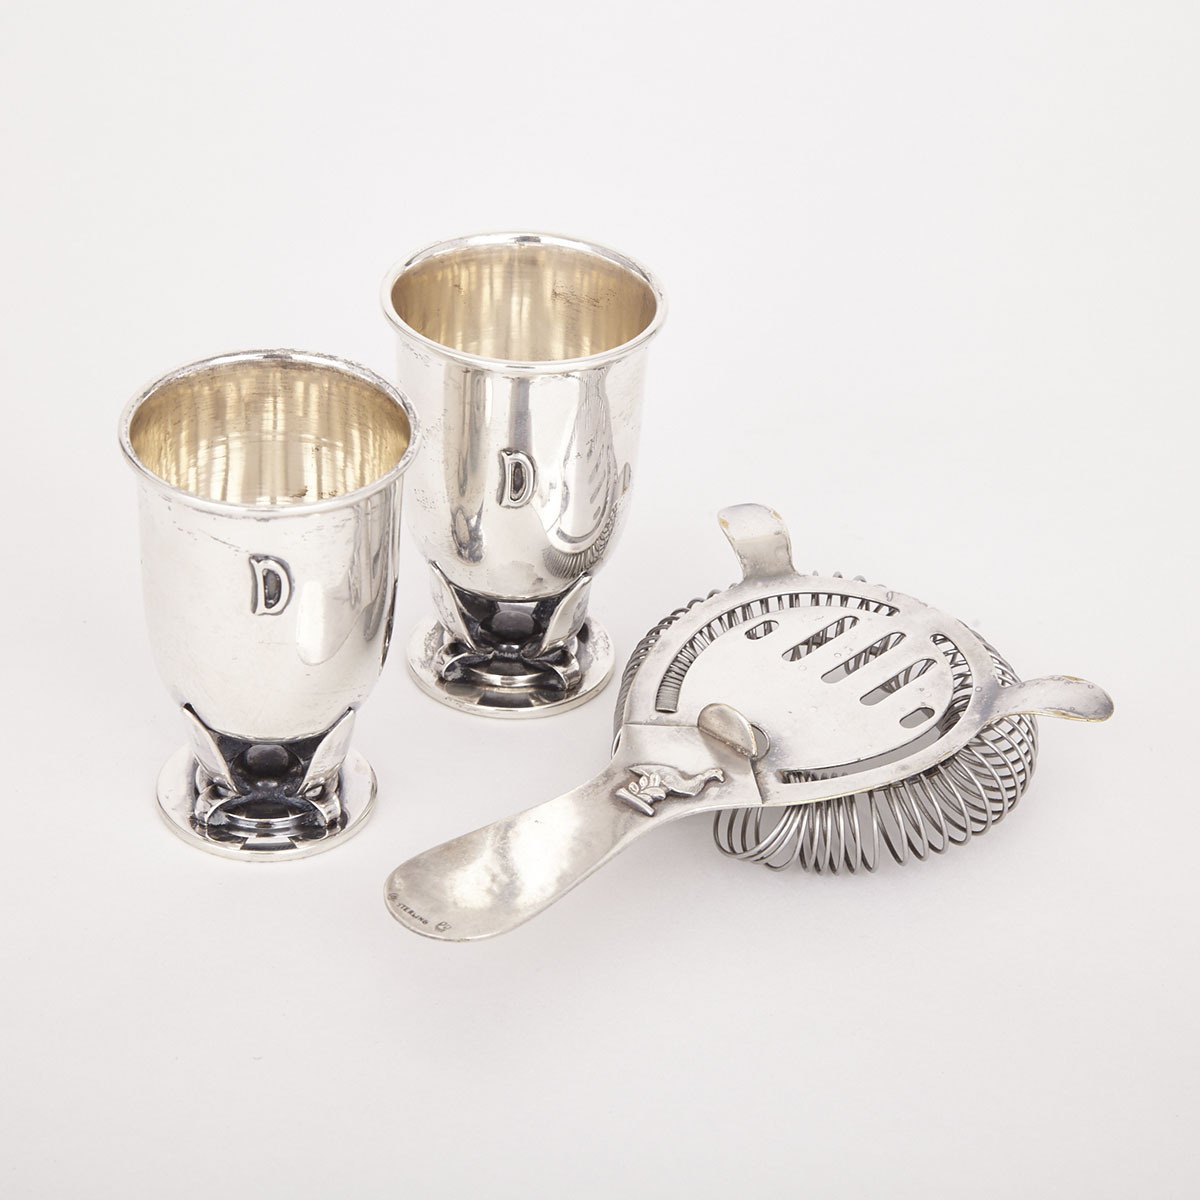 Pair of Canadian Silver Cups, Carl Poul Petersen, Montreal, Que., mid-20th century 